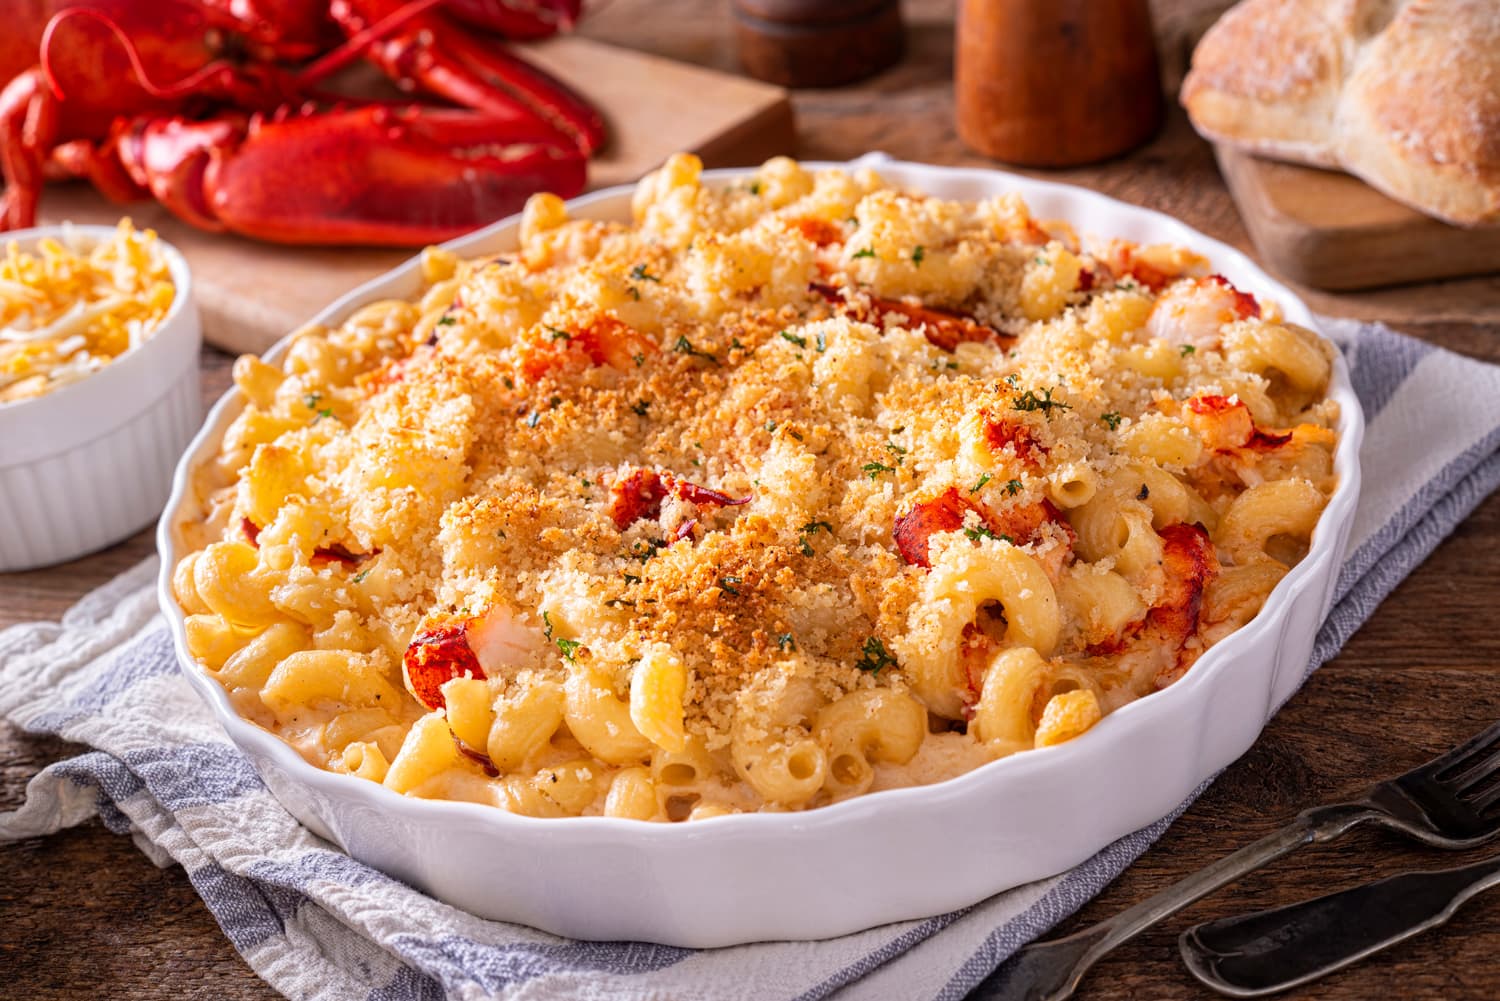 A delicious lobster macaroni and cheese casserole on a rustic wood table top.